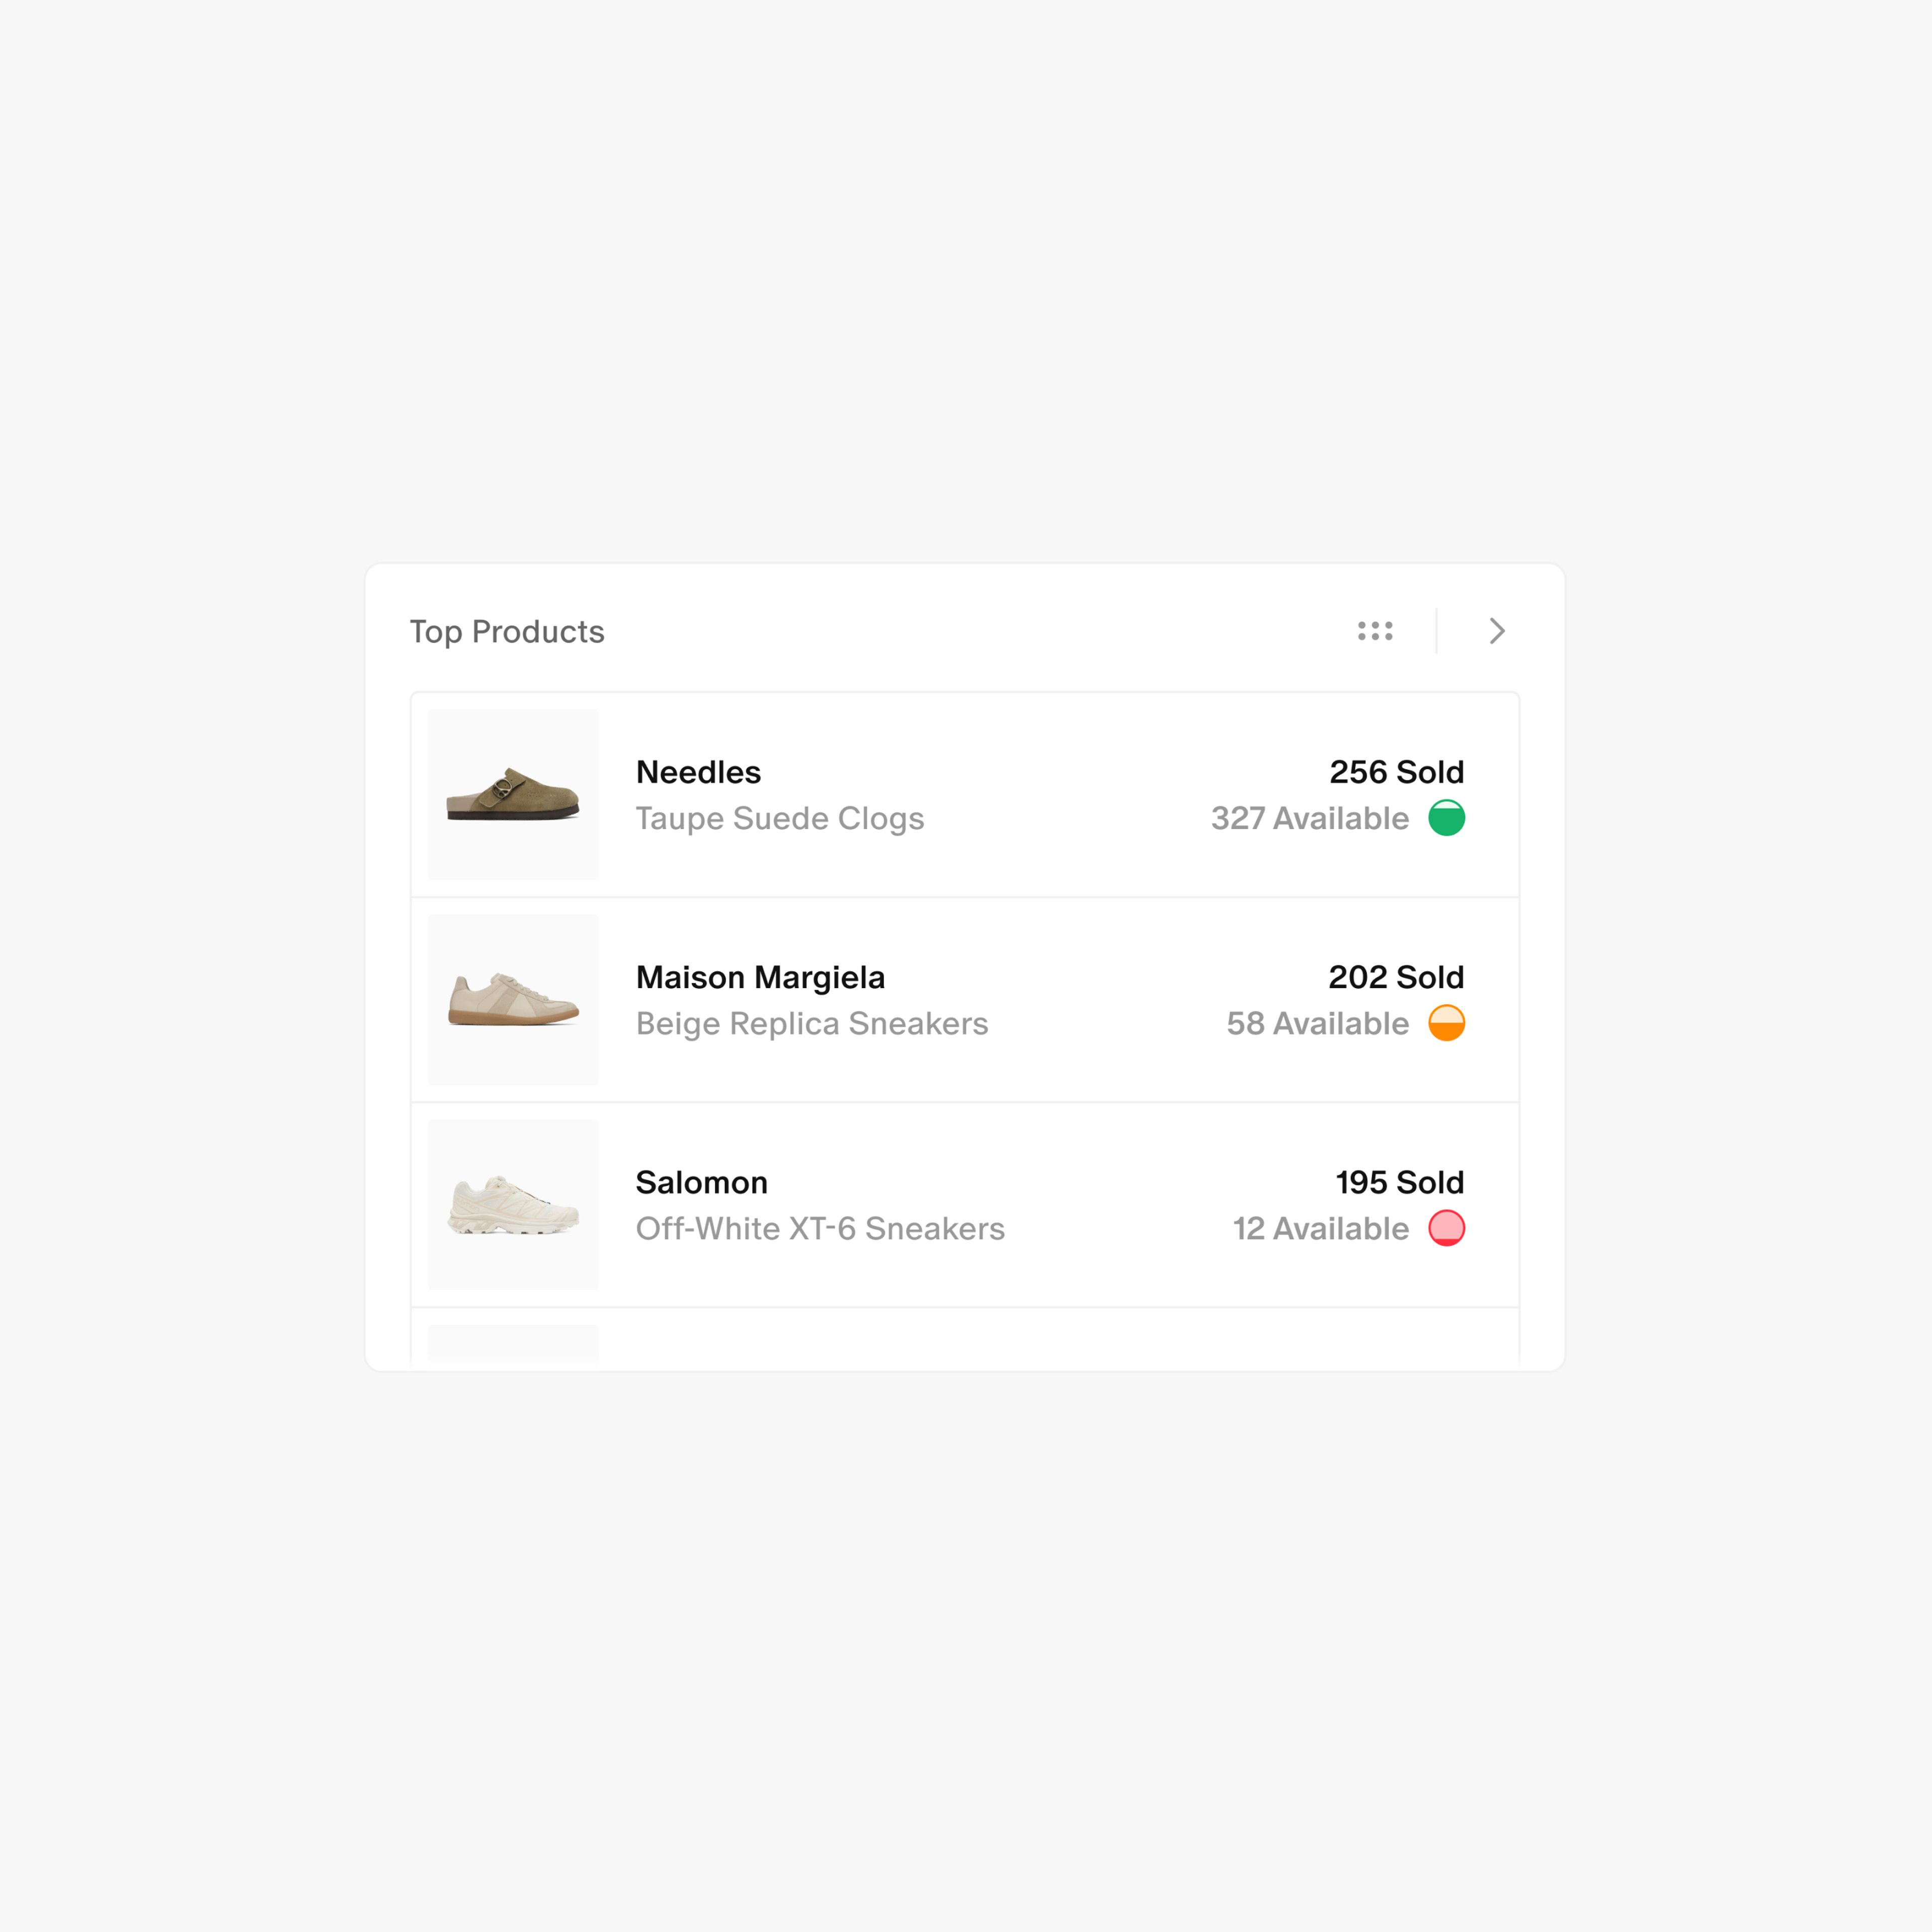 A dashboard component from the inventory management system "Inventra" displaying the best selling items from the users store